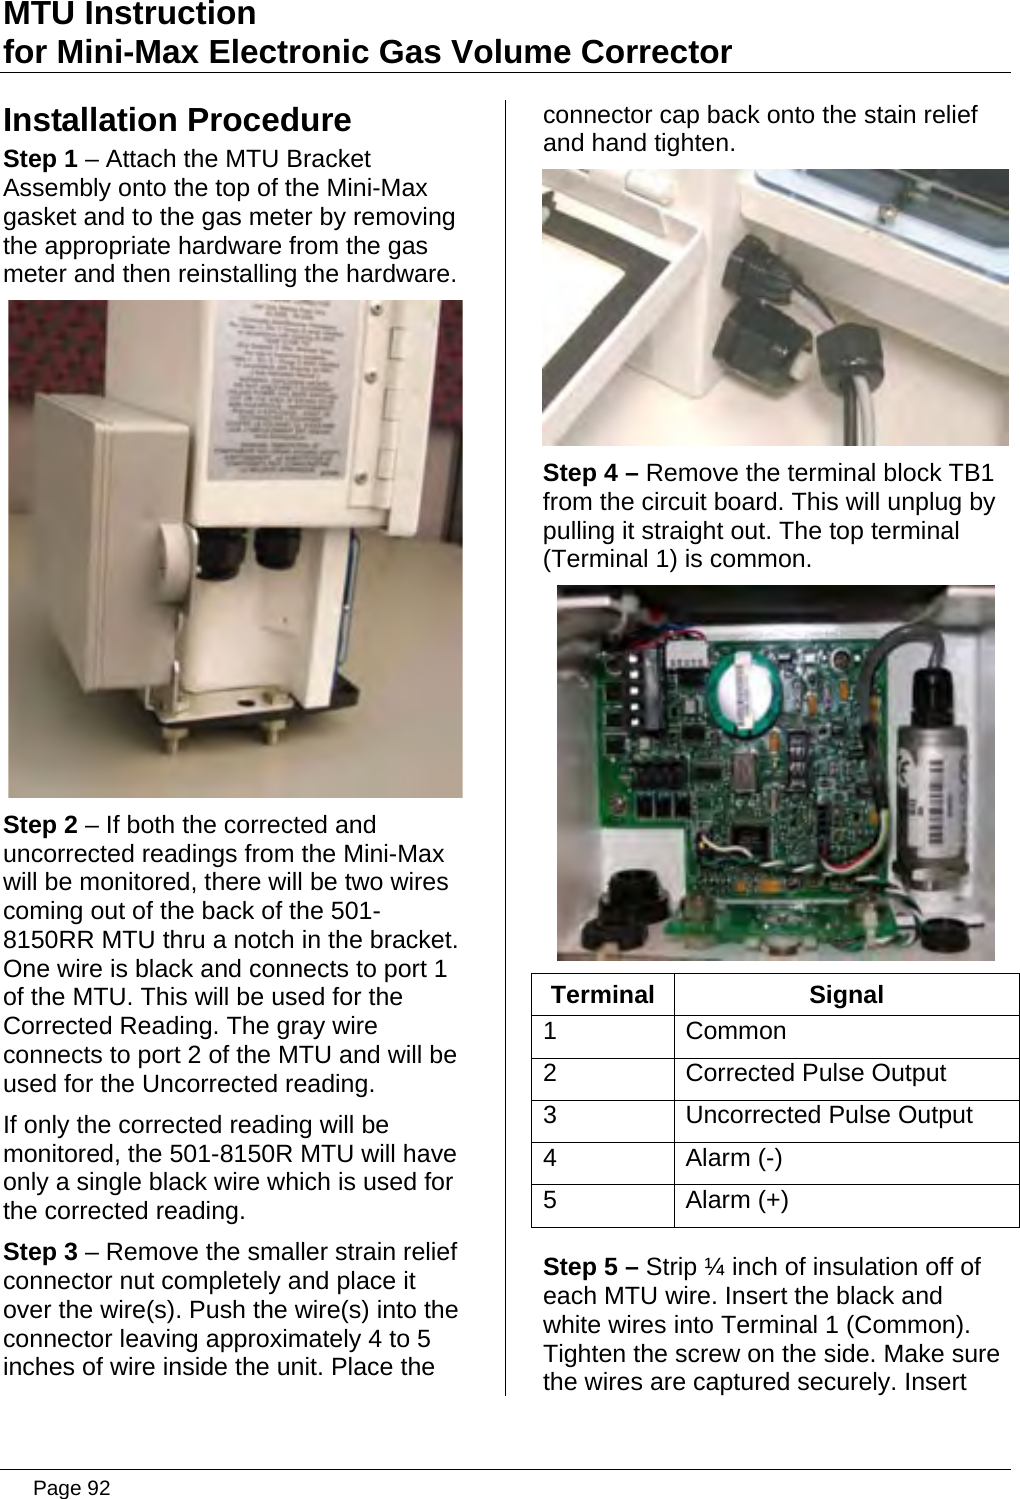 Page 92 of Aclara Technologies 09015 Transmitter for Meter Reading User Manual users manual